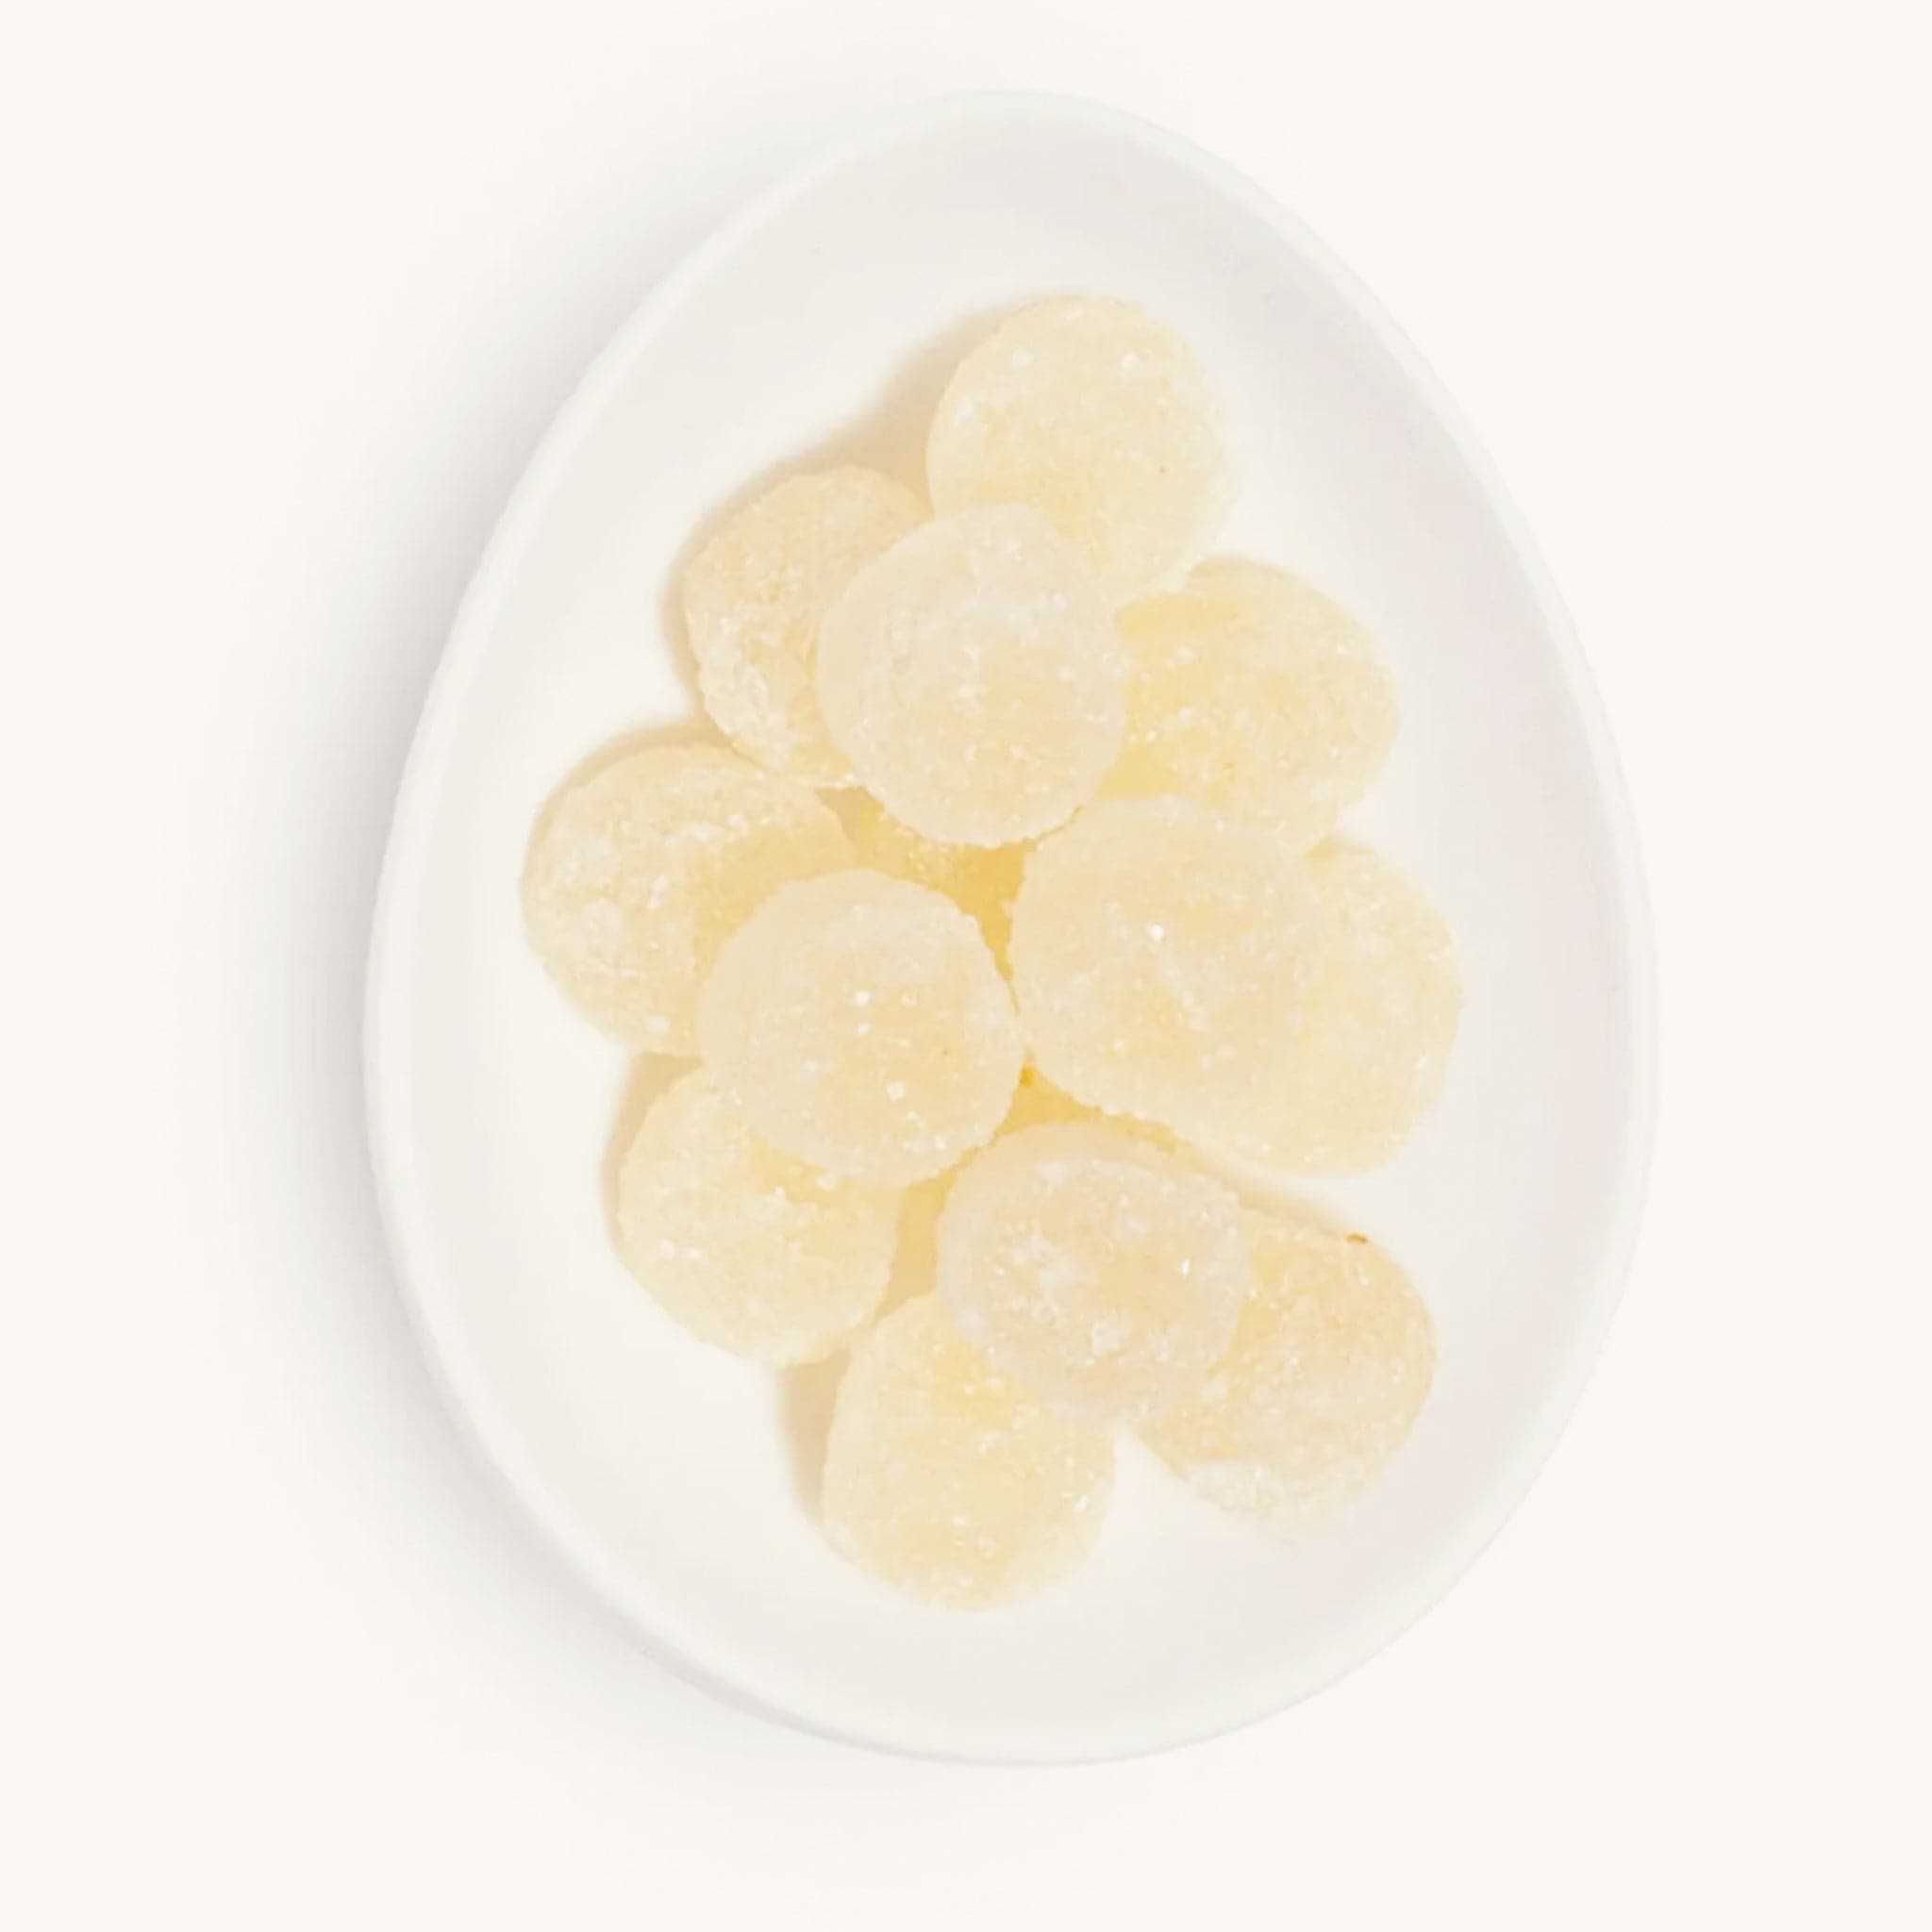 Birds eye view of a white egg shaped dish filled with light yellow candies. The candies are coated in white sugar. 